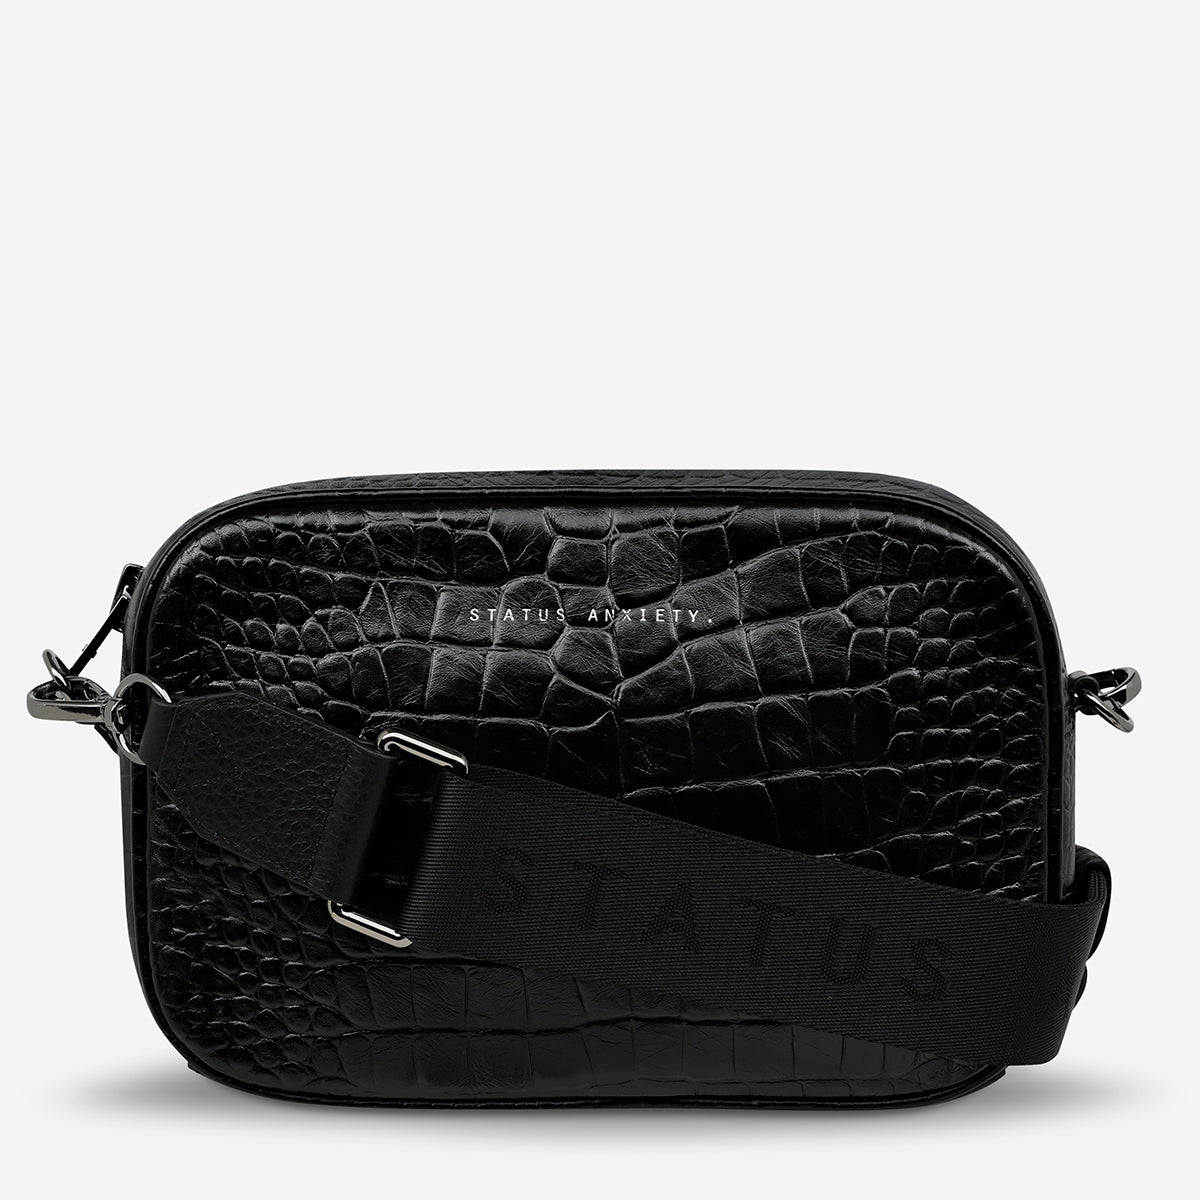 status-anxiety-bag-plunder-without-you-strap-black-croc-front-wrapped.jpg